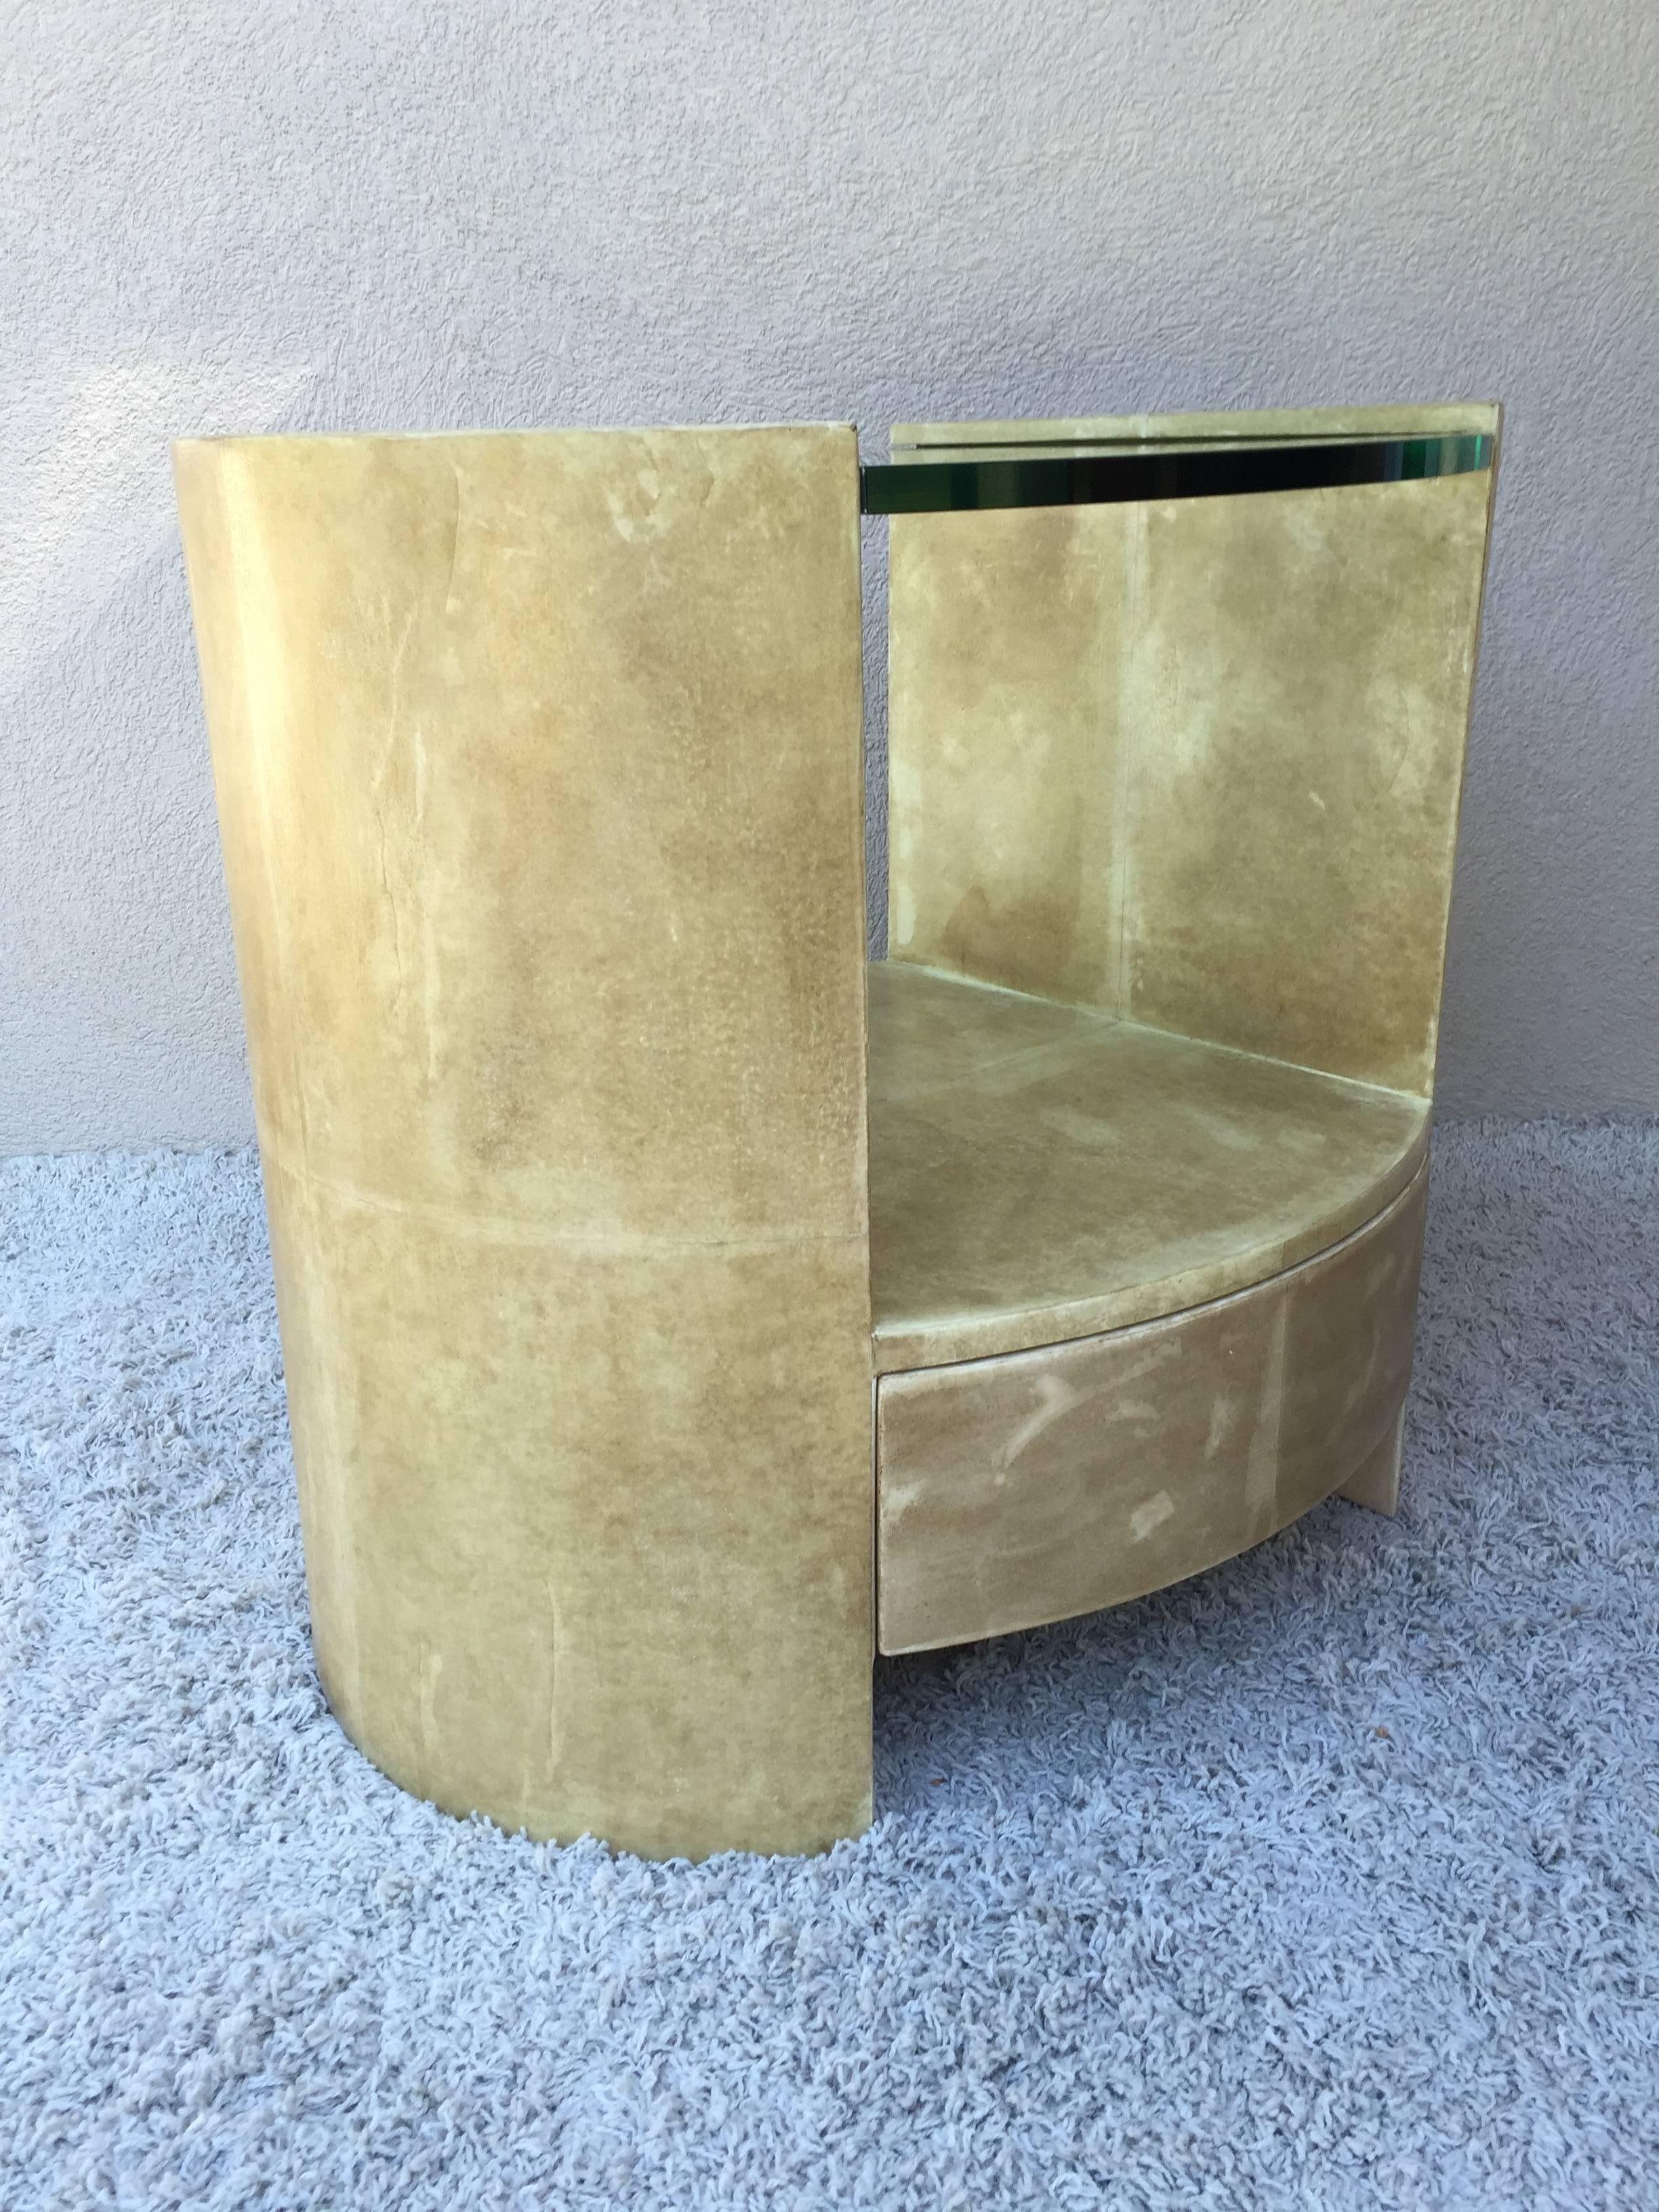 Pair of Ron Seff Goatskin Parchment Glass Side Tables /Nightstands Tables In Excellent Condition For Sale In Westport, CT